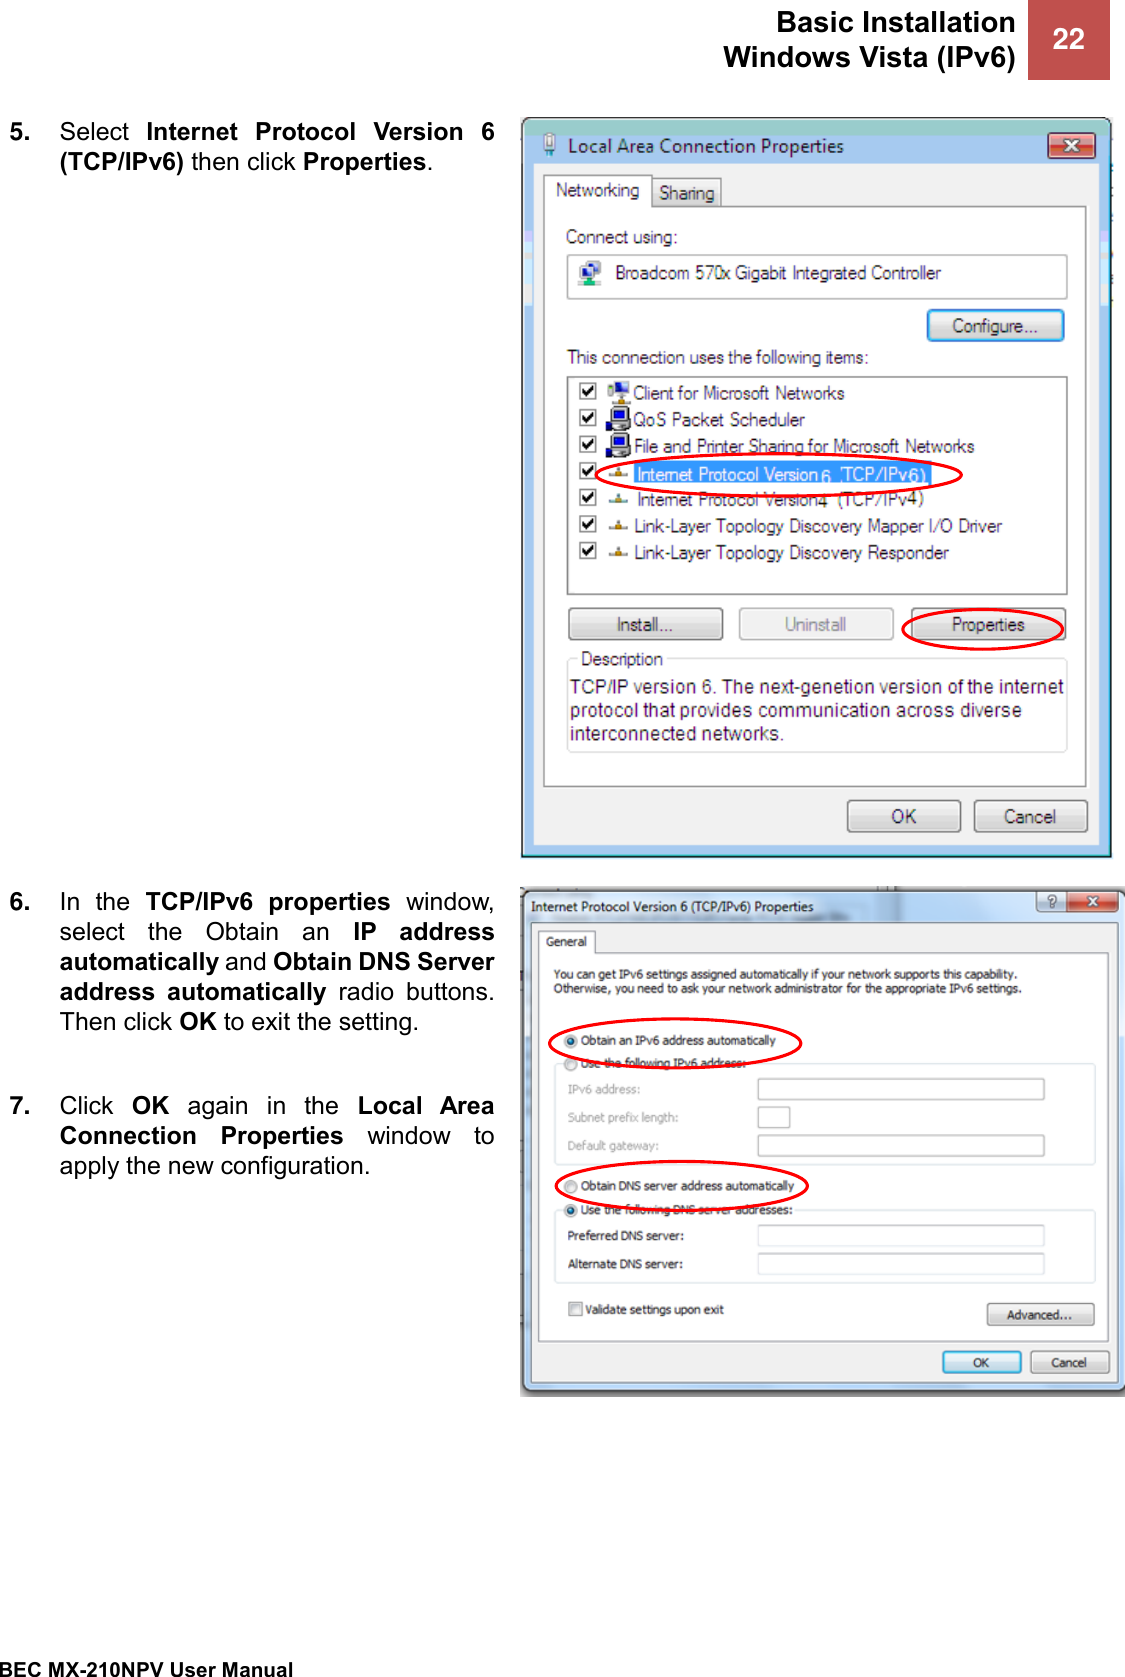 Basic Installation Windows Vista (IPv6) 22   BEC MX-210NPV User Manual  5. Select  Internet  Protocol  Version  6 (TCP/IPv6) then click Properties.  6. In  the  TCP/IPv6  properties  window, select  the  Obtain  an  IP  address automatically and Obtain DNS Server address  automatically  radio  buttons. Then click OK to exit the setting.  7. Click  OK  again  in  the  Local  Area Connection  Properties  window  to apply the new configuration.   